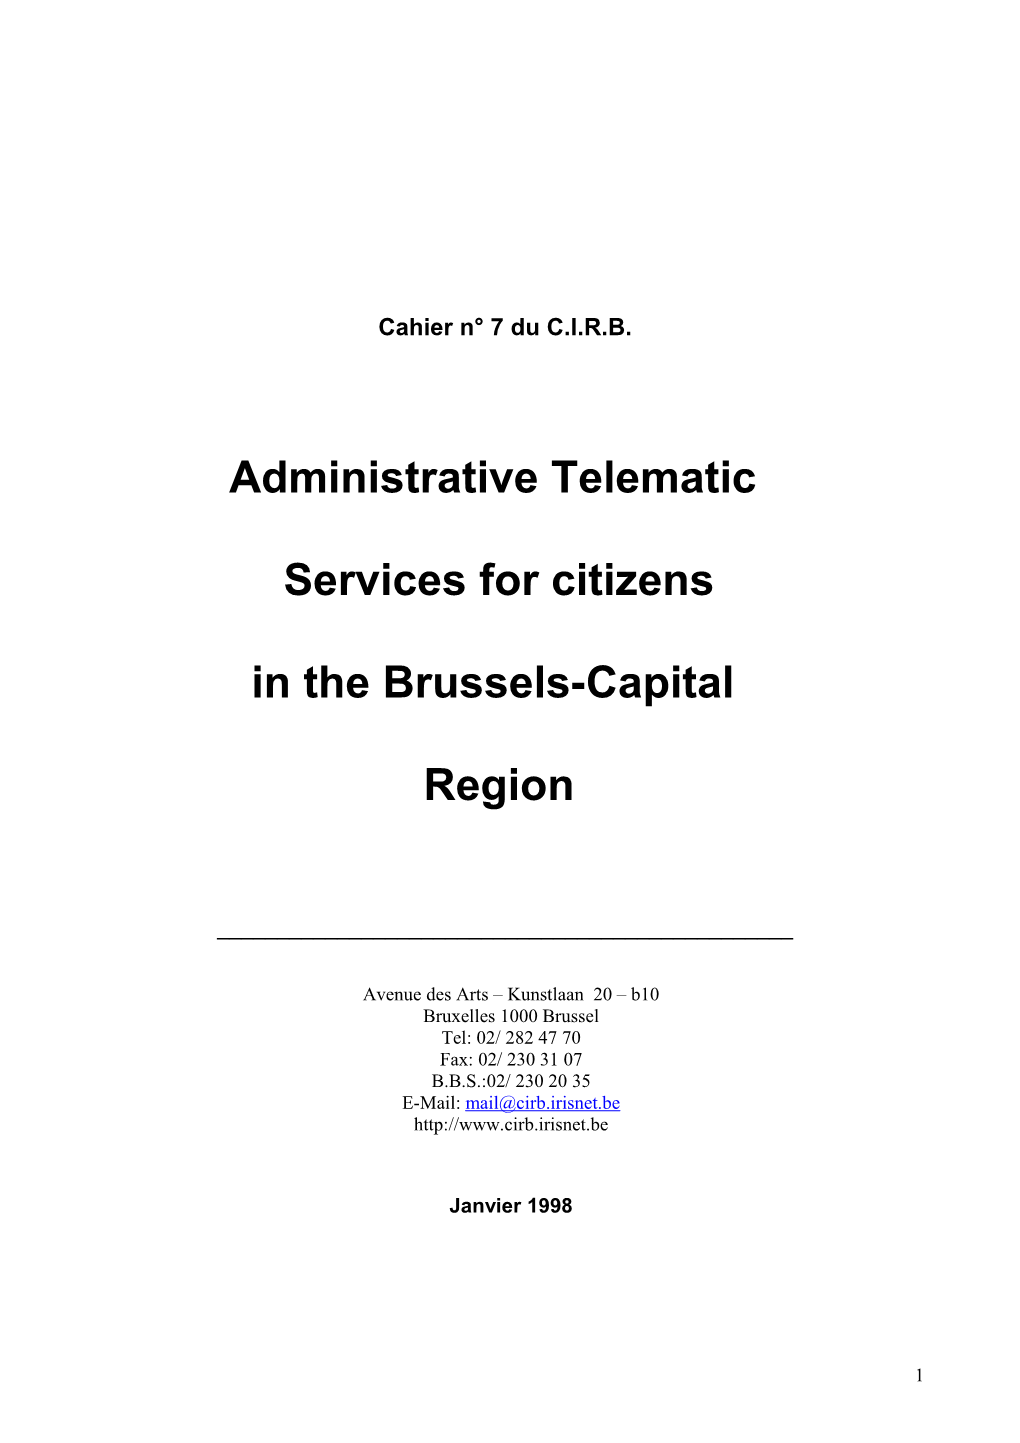 Administrative Telematic Services for Citizens in the Brussels-Capital